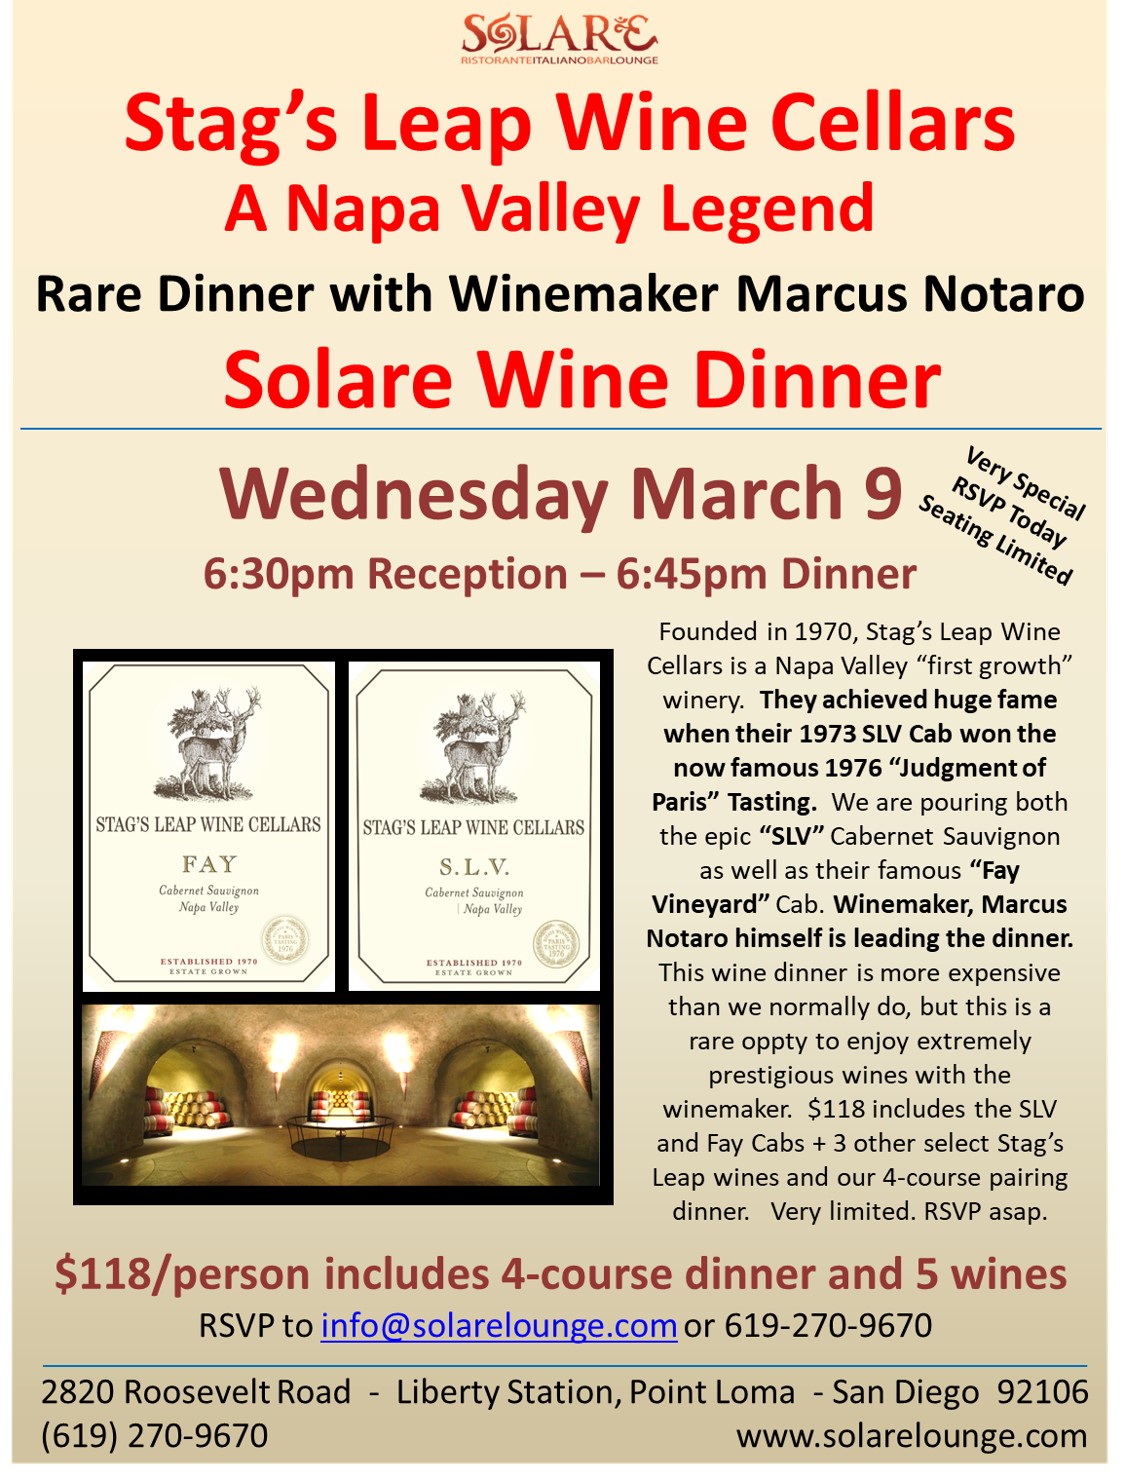 <a id="Solare-Stags-Leap-Wine-Dinner"></a>Napa Valley Legend - Stag's Leap Wine Cellars Winemaker